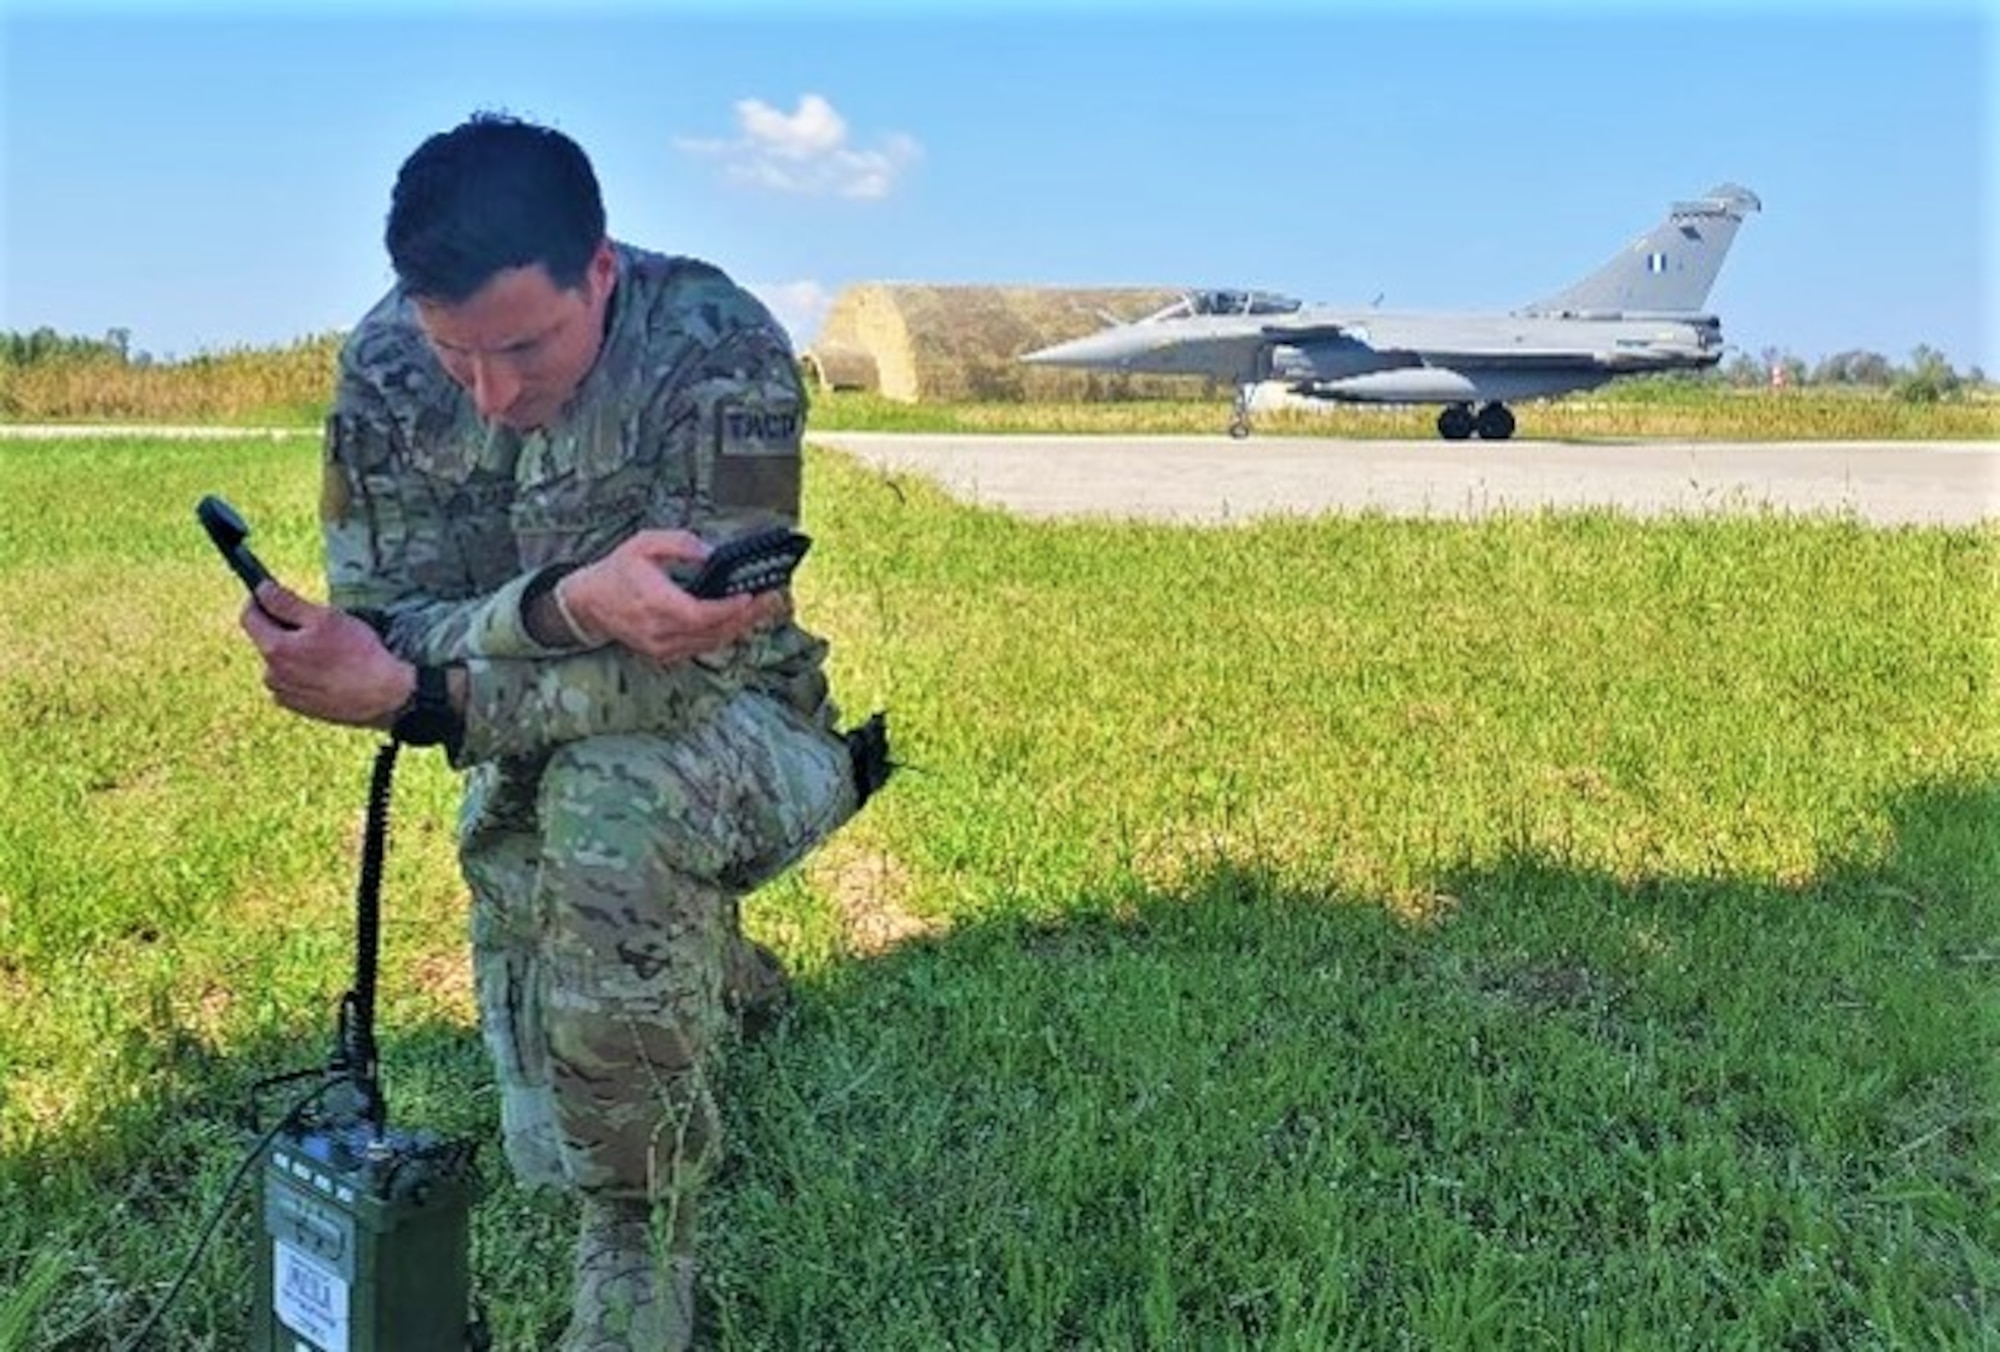 4CTS successfully integrated with aircrews during pre-mission planning, execution, and debriefs. The team conducted HF training and provided additional Practical Exercises for the 2nd Air Support Operations Squadron TACPs.